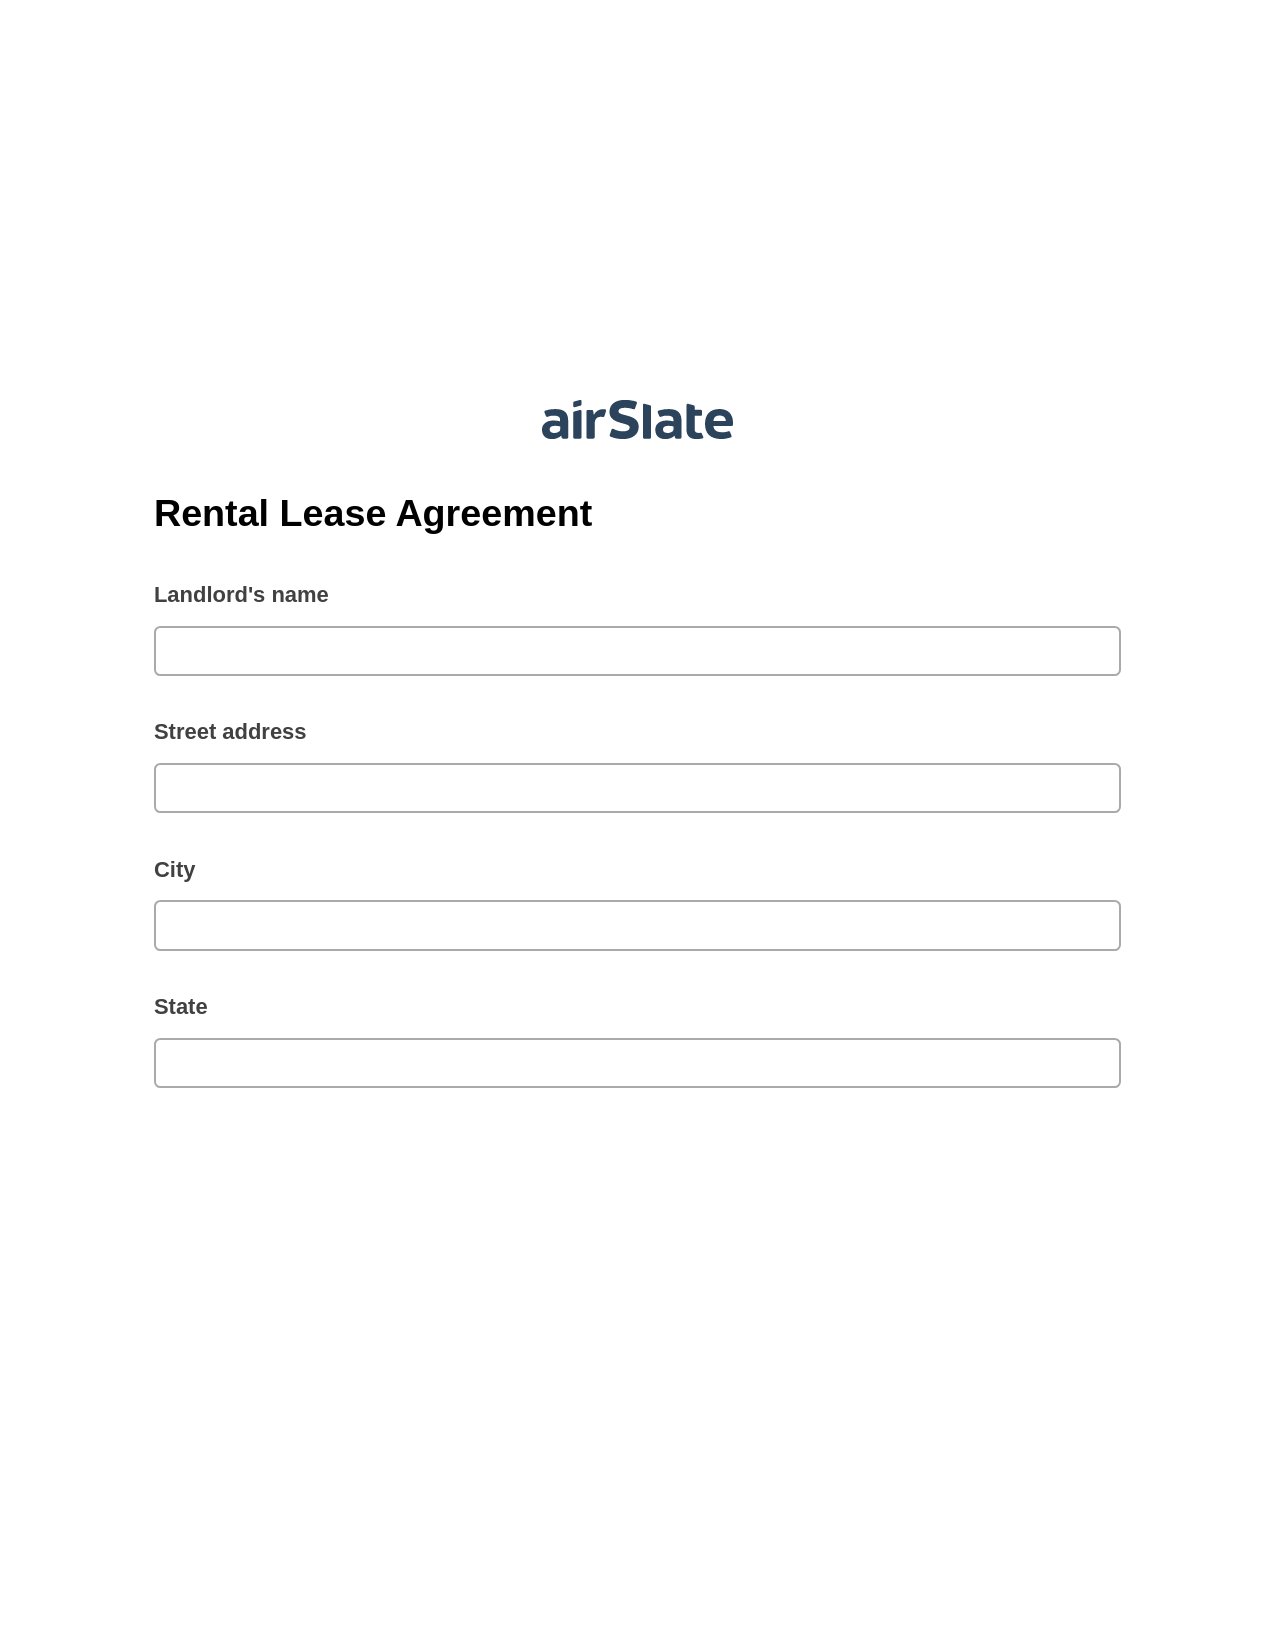 Rental Lease Agreement Pre-fill Document Bot, Roles Reminder Bot, Email Notification Postfinish Bot